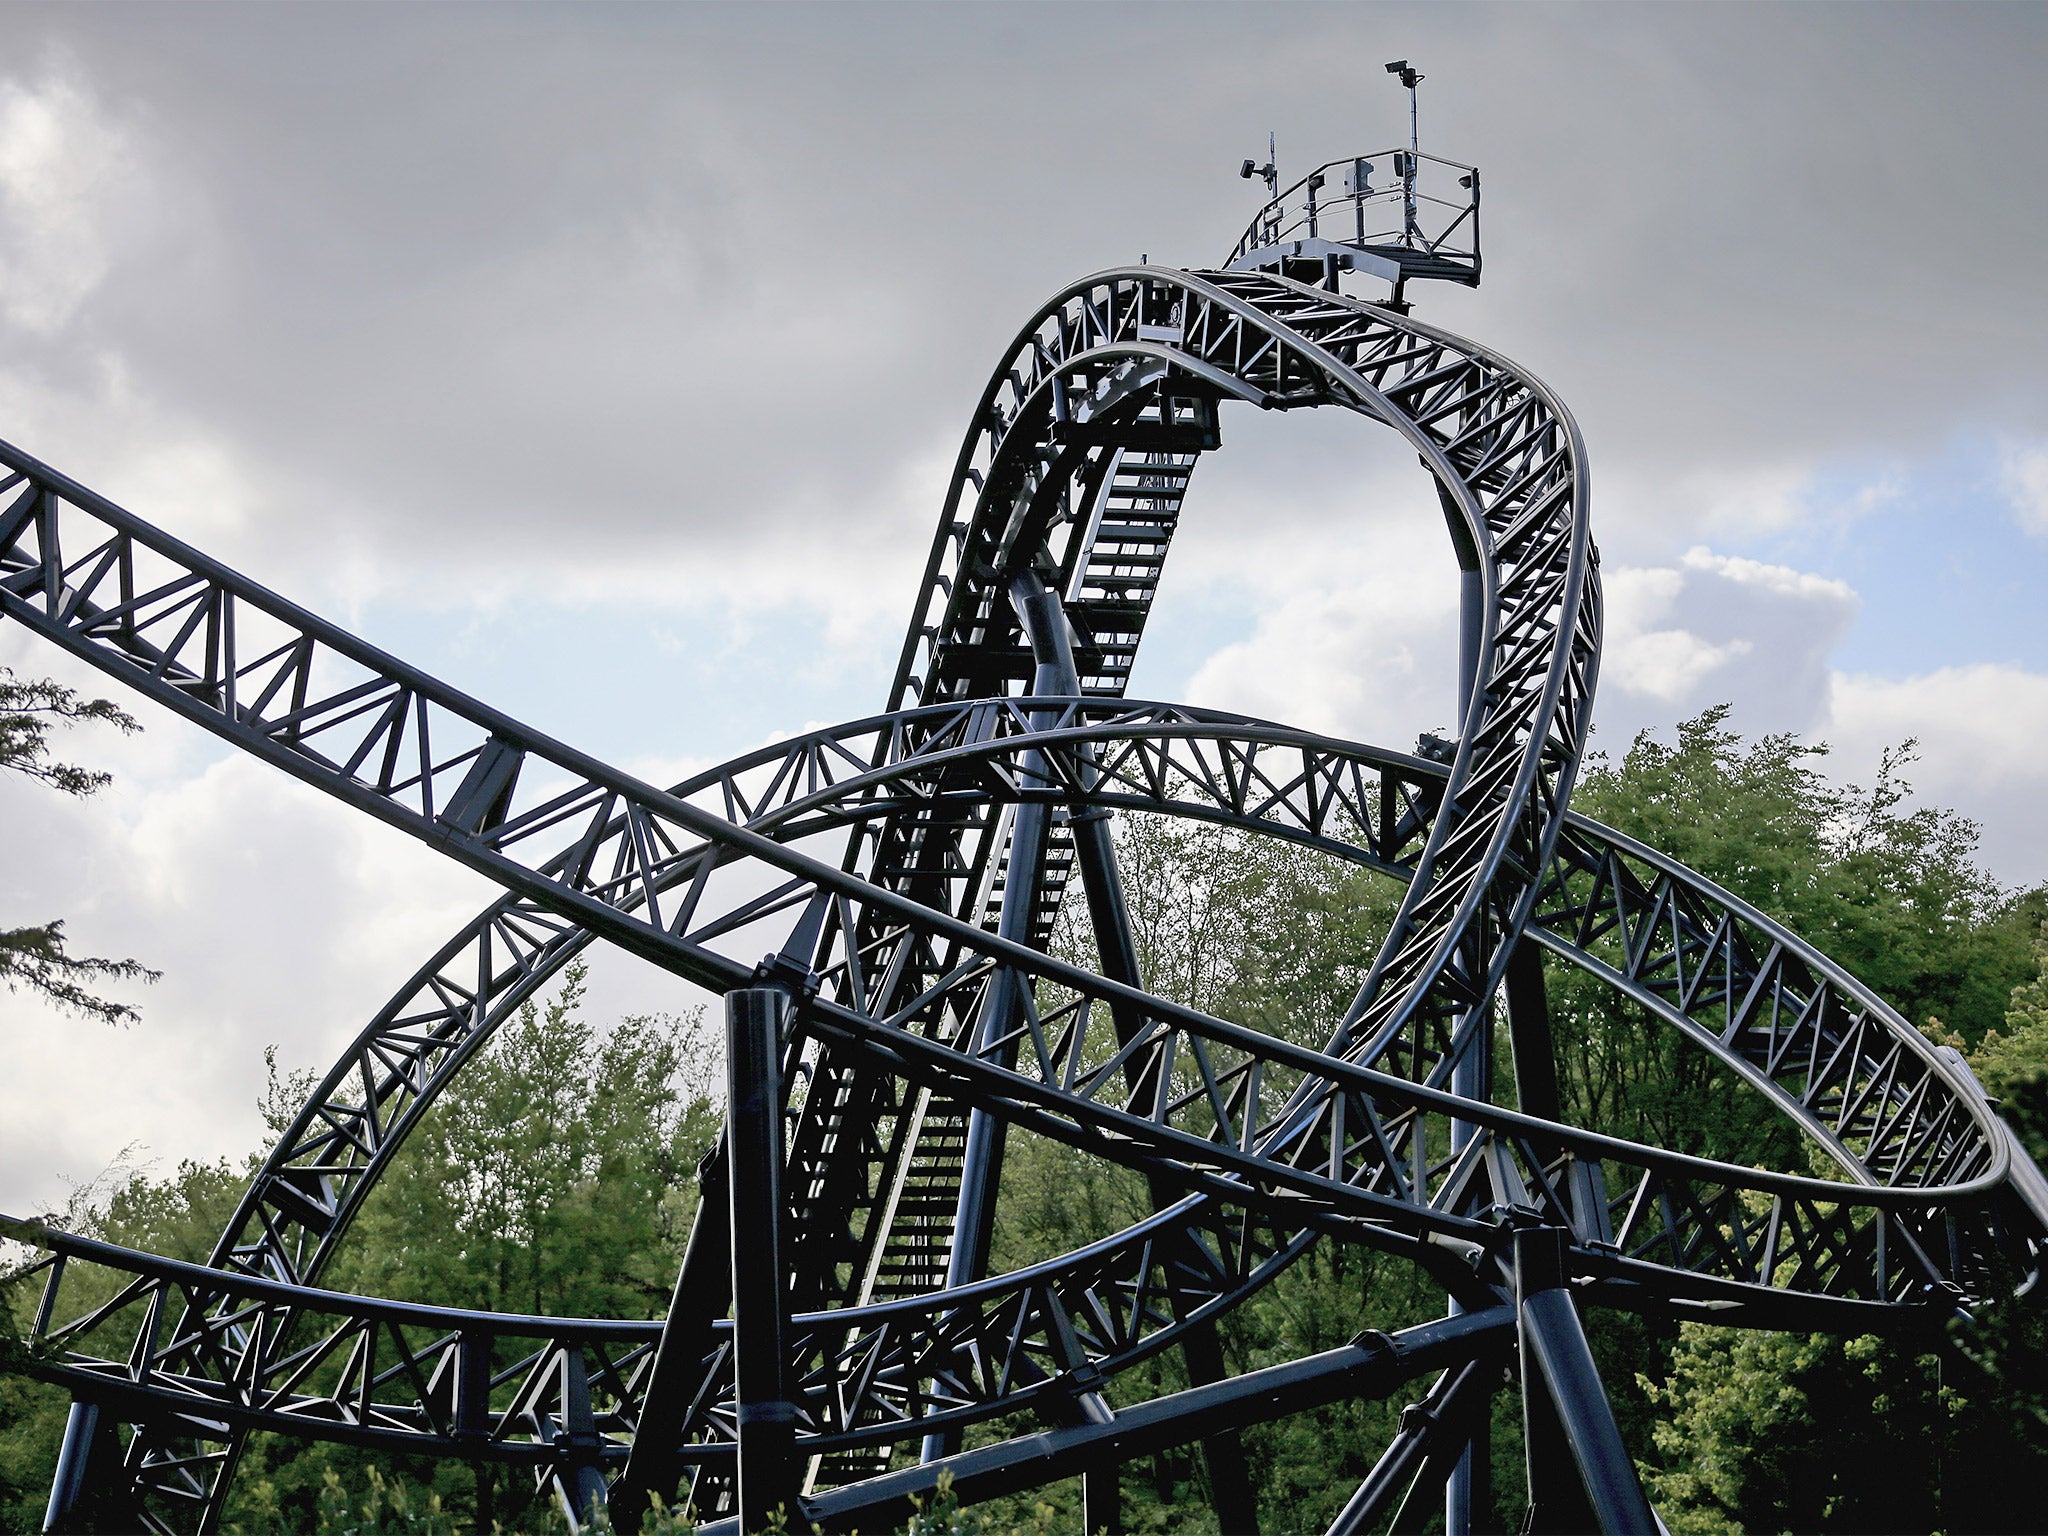 The Smiler roller-coaster at Alton Towers, which crashed in June, causing two people to lose limbs